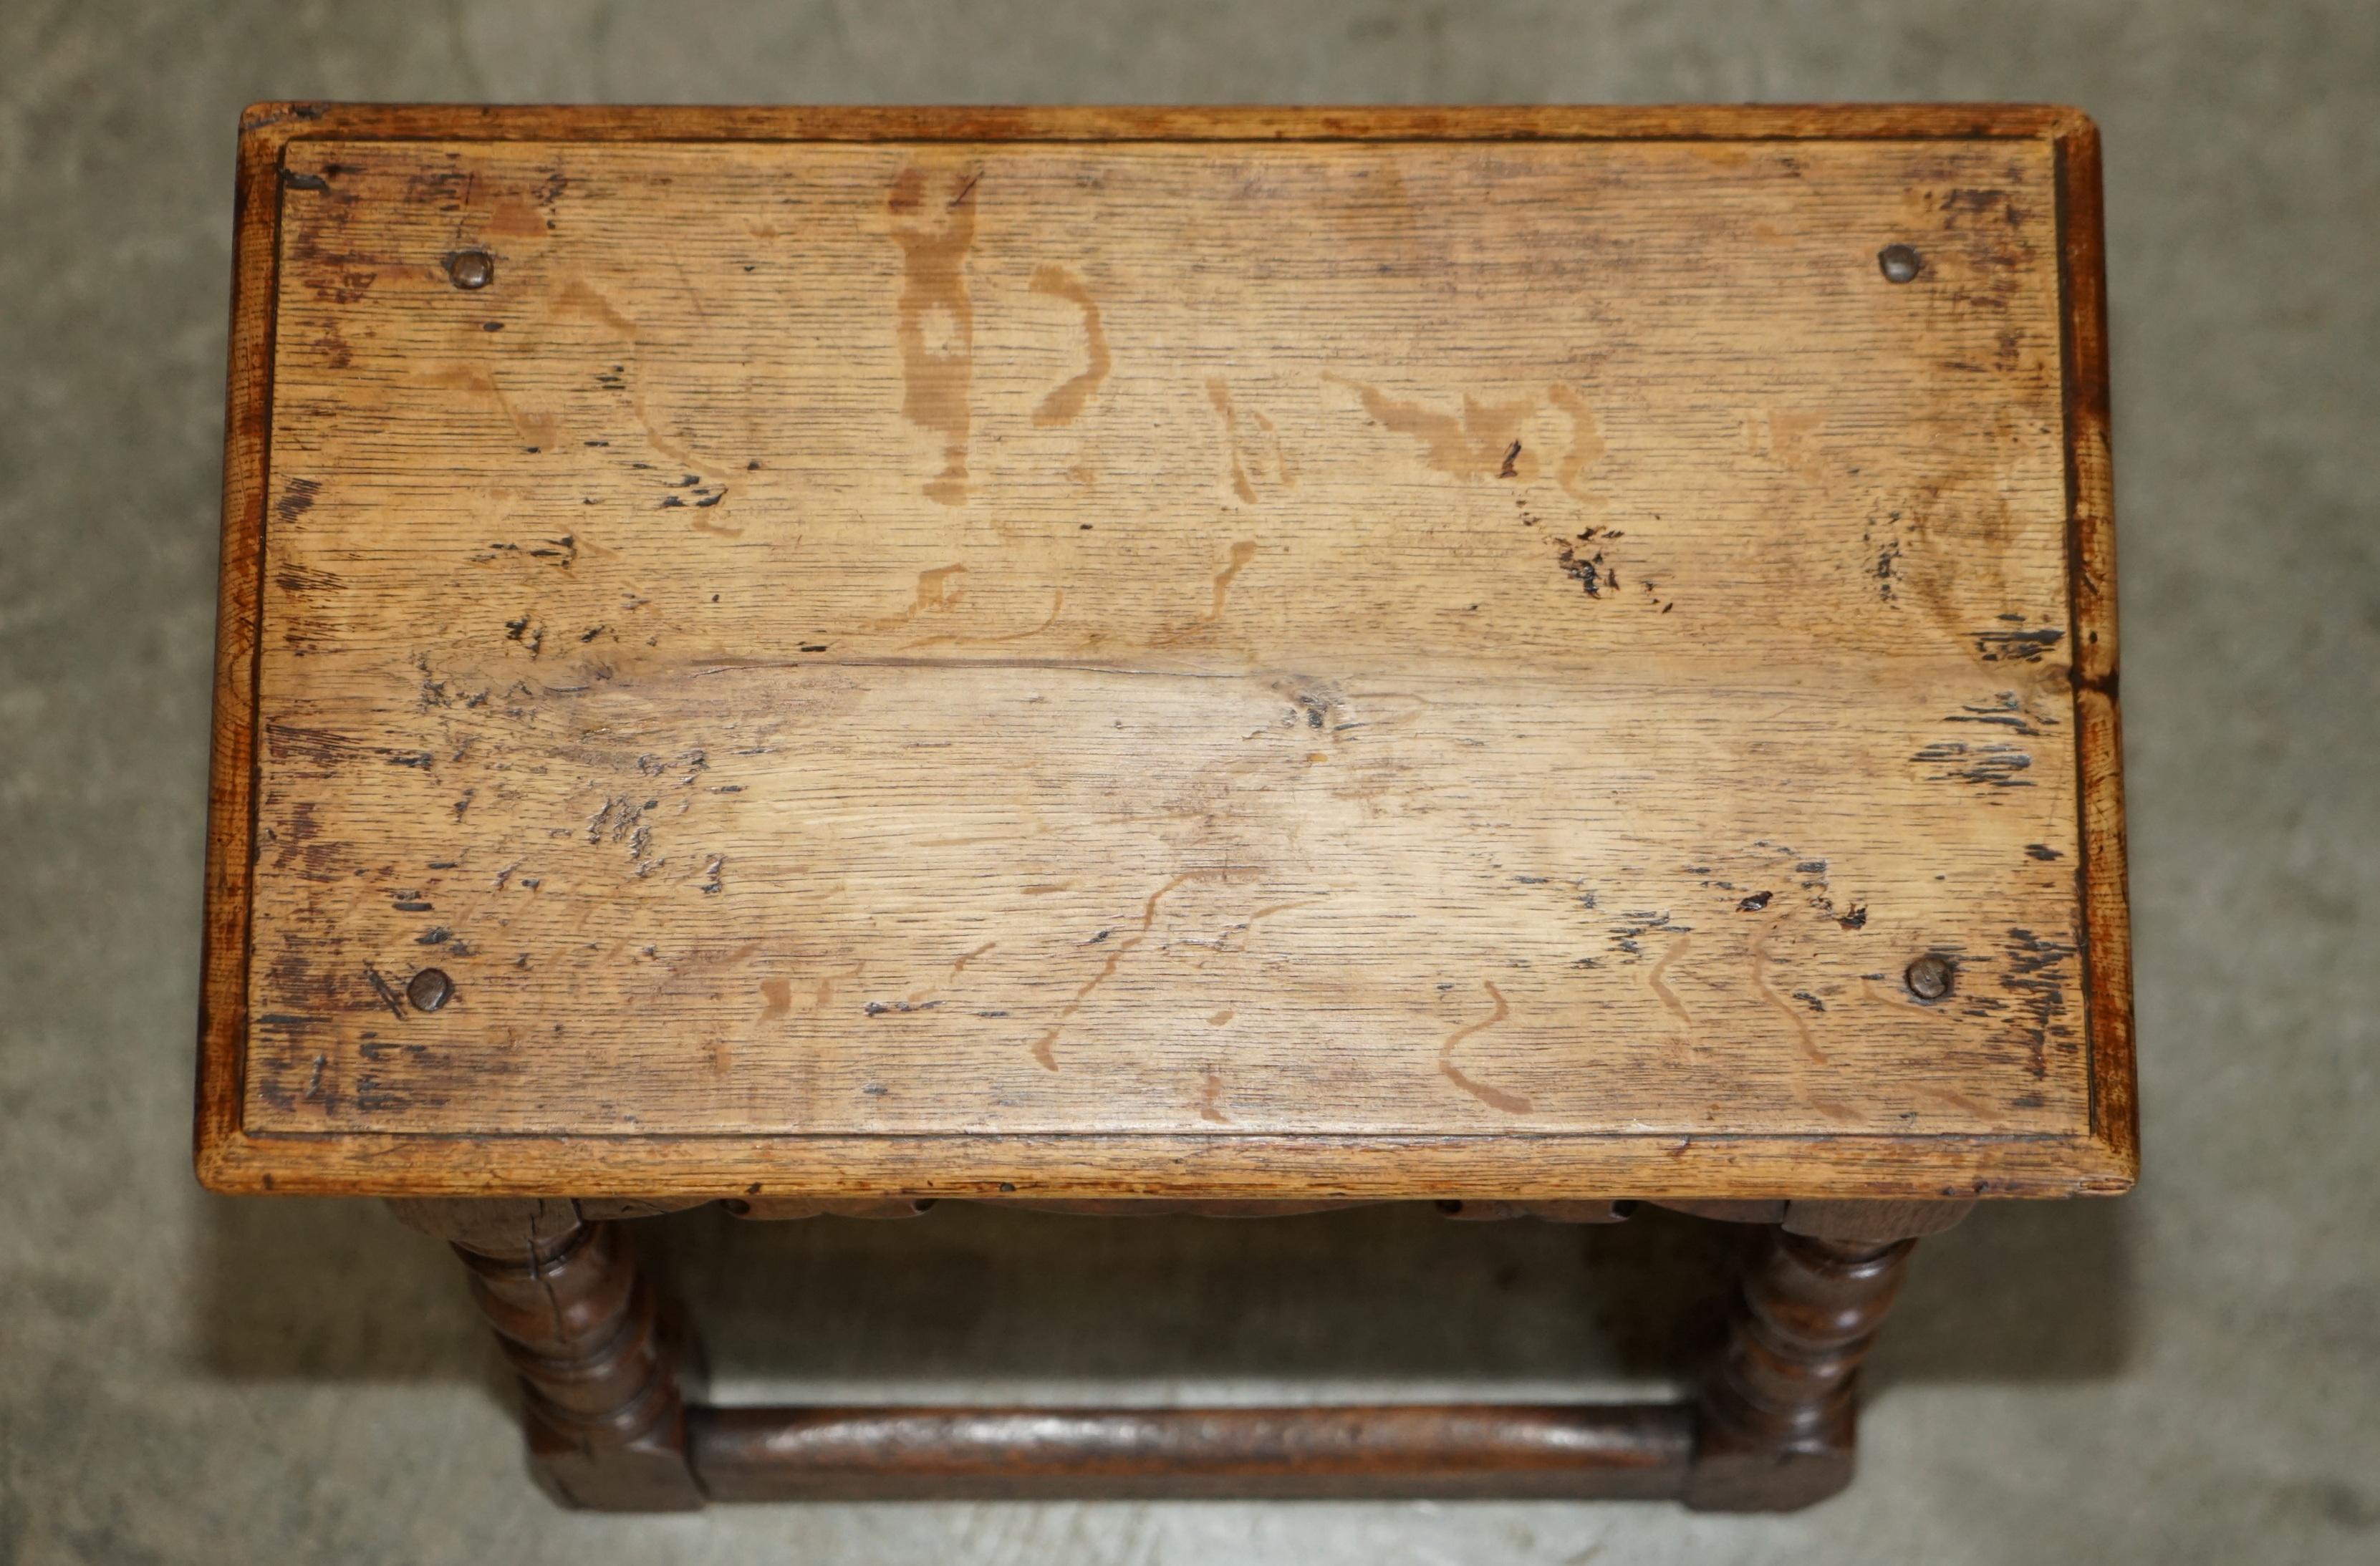 Hand-Crafted Stunning 18th Century circa 1760 English Oak Jointed Stool or Side End Table For Sale